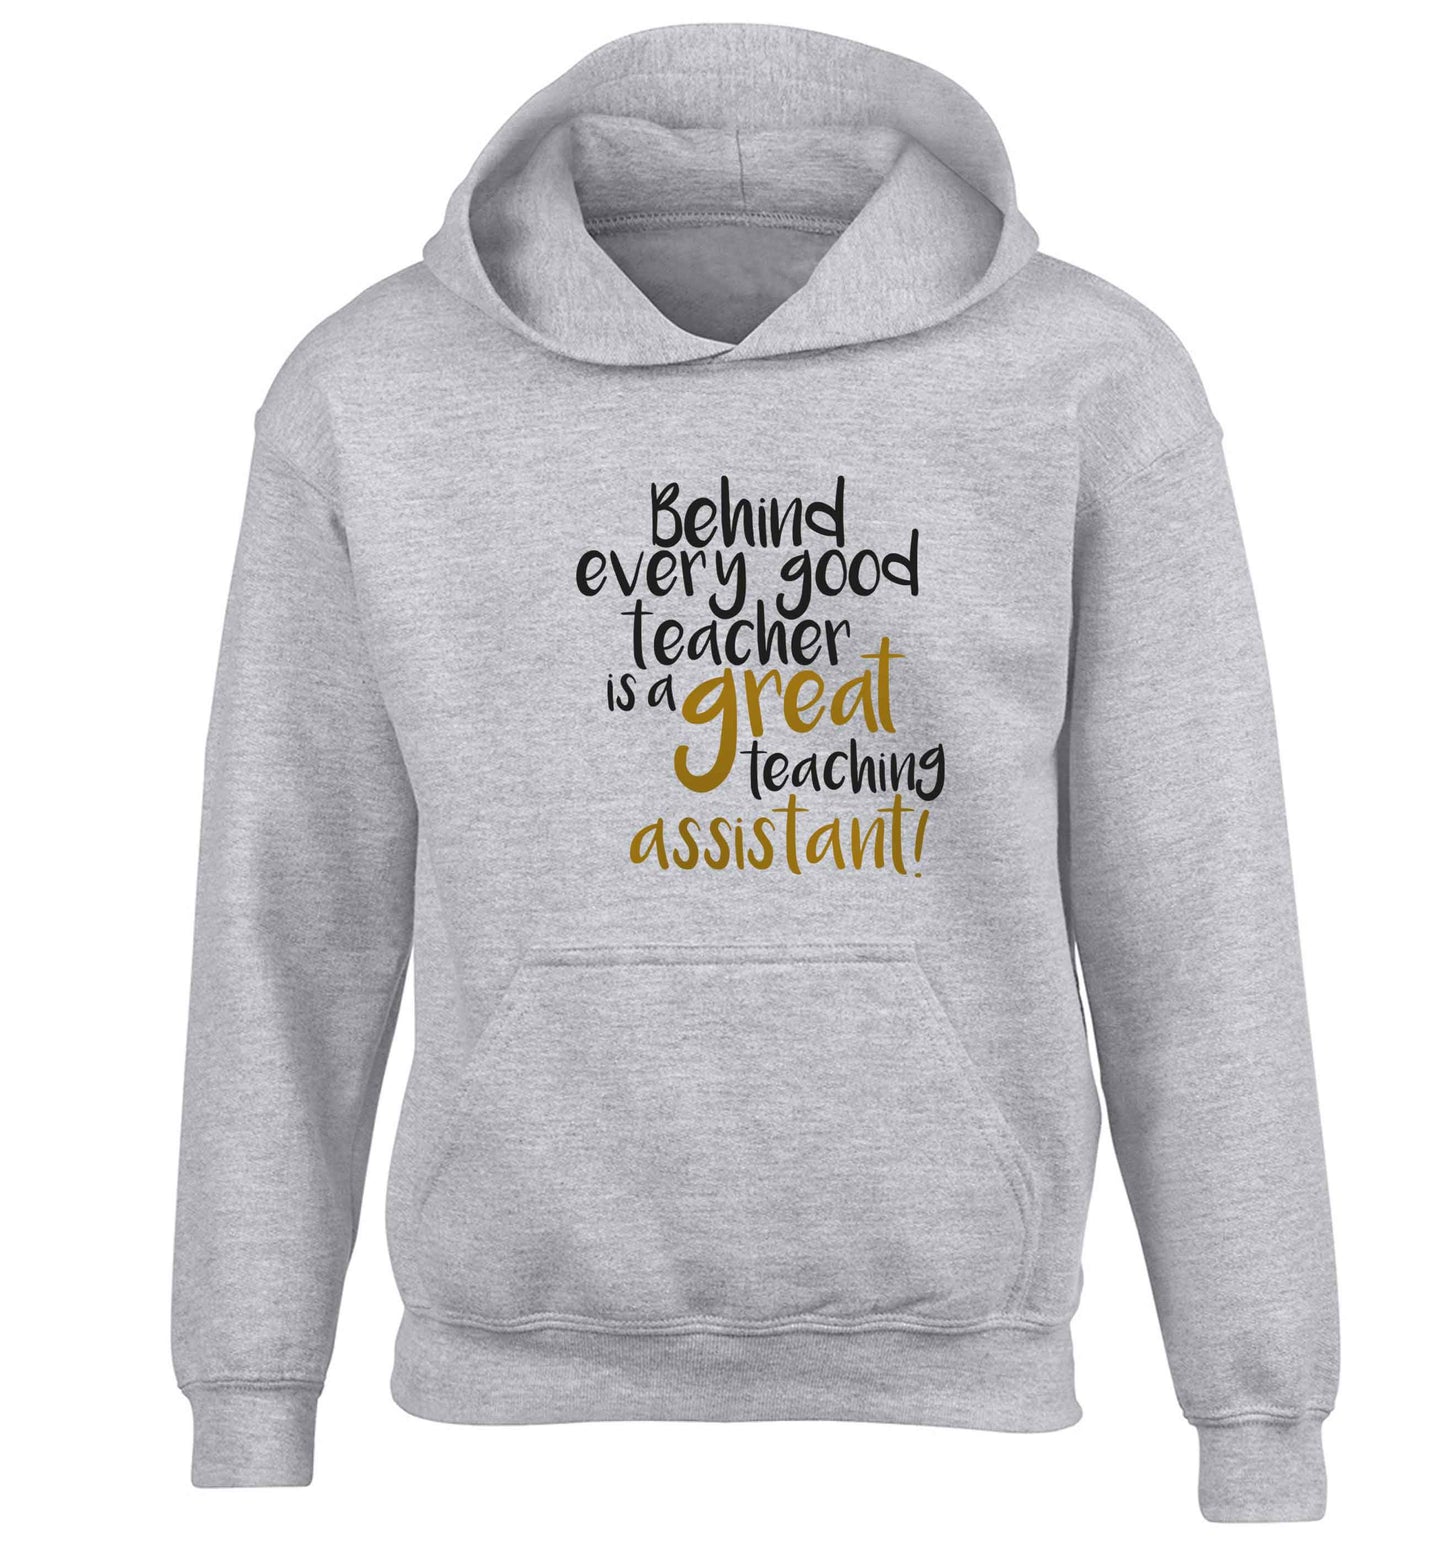 Behind every good teacher is a great teaching assistant children's grey hoodie 12-13 Years